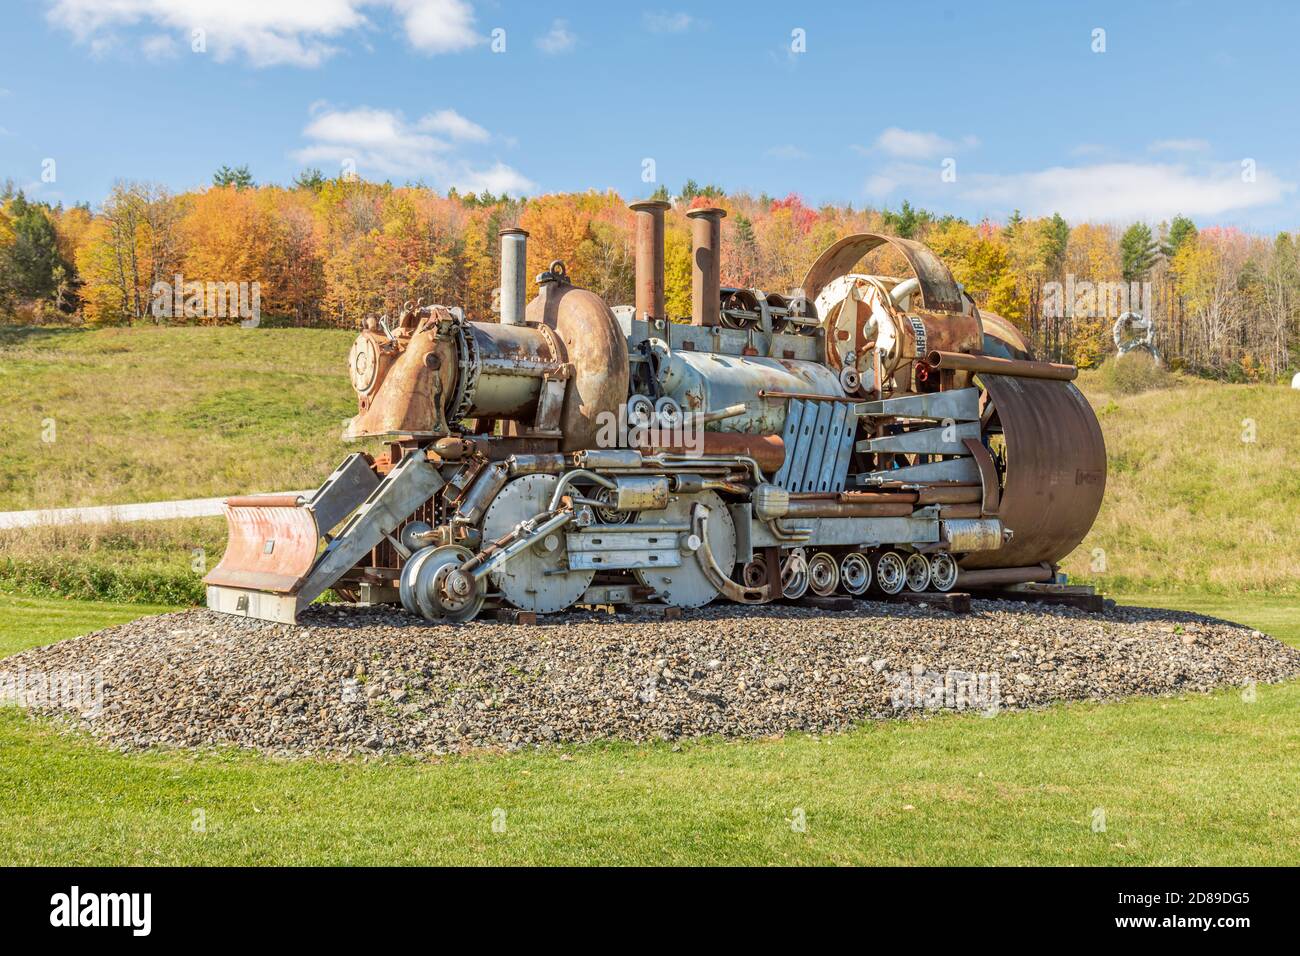 Full size steam locomotive made of junk by Guohua Xu in West Rutland, Vermont Stock Photo